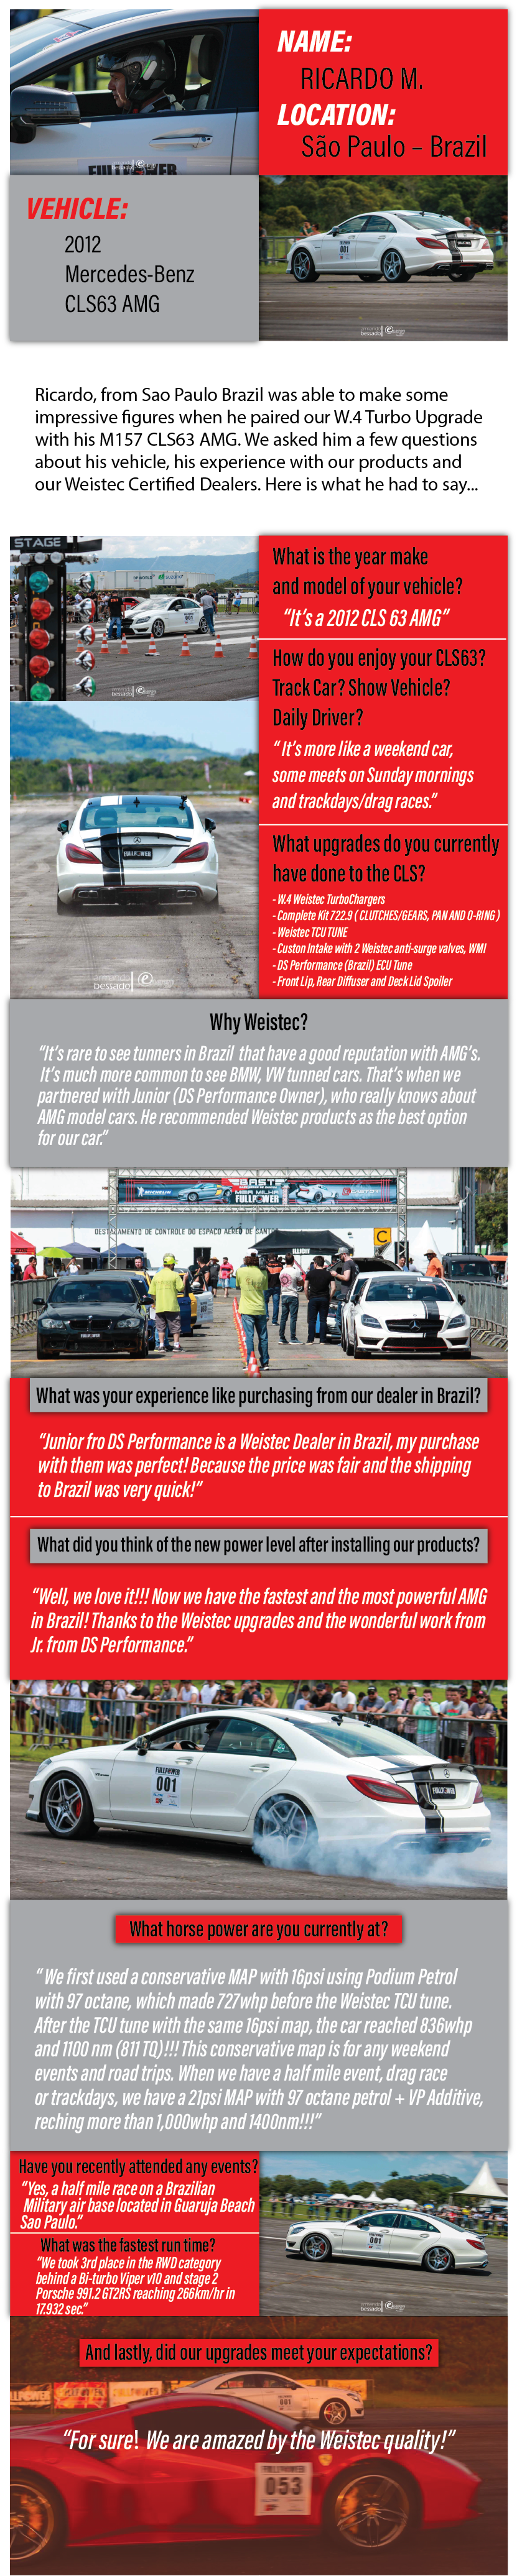 Name Ricardo M. Location Sao Paulo Brazil. Ricardo, from Sao Paulo Brazil was able to make some impressive figures when he paired our W4 Turbo Upgrade with M157 CLS63 AMG. We asked him a few questions about his vehicle, his experience with our products and our Weisetc Certified Dealers. Here is what he had to say... What is the year make and model of your vehicle? Its a 2012 CLS 63 AMG. How did you enjoy you CLS 63? Track Car? Show Vehicle? Daily Driver? Its more like a weekend car, some meets on Sunday mornings and trackdays slash drag races. What upgrades do you currently have done to the CLS? W$ Weustec Turbochargers. Complete Kit 722 point 9. Clutches, gears, pan and O ring. Weistec TCU Tune. Custom Intake with 2 Weistec anti surge vales. WMI. DS Performance ECU tune from Brazil. Front Lip, Rear Diffuser and Deck Lid Spoiler. Why Weistec? Its rare to see tuners in Brazil that have a good reputation with AMGs. Its much more common to see BMW and VW tuned cars. Thats when we partnered with Junior, the owner of DS Performance, who really knows about AMG model cars. He recommended Weistec products as the best option for our car. What was your experience like purchasing from our dealer in Brazil? Junior from DS Performance is a Weistec Dealer in Brazil, my purchase with them was perfect! Because the price was fair and the shipping to Brazil was very quick! What did you think of the new power level after installing our product? Well, we love it! Now we have the fastest and most powerful AMG in Brazil! Thanks to the Weistec upgradeds and the wonderful work from Junior from DS Performance. What horse power are you currently at? We first used a conservative MAP with 16 psi using podium petrol with 97 octane, which made 727 Wheel horse power before the Weistec TCU Tune. After the TCU tune with the same 16 psi map, the car reached 836 Wheel horse power and 1100 newton meters or 811 TQ! This conservative map is for any weekend events and roadt trips. When we have a half mile event, drag race or trackdays, we have a 21 psi MAP with 97 octane petrol plus VP additive, reaching more than 1000 wheel horse power and 1400 newton meters! Have you recently attended any events? Yes, a half mile race on a Brazil Military air base located in Gauruja Beach Sao Paulo. What was the fastest run time? We took third place in the RWD category behind a Bi turbo Viper v10 and stage 2 Porsche 992 point 1 GT2 RS reaching 266 km per hour in 17 point 932 seconds. And lastly, did our upgrades meet your expectations? For sure! We are amazed by the Weistec quality!